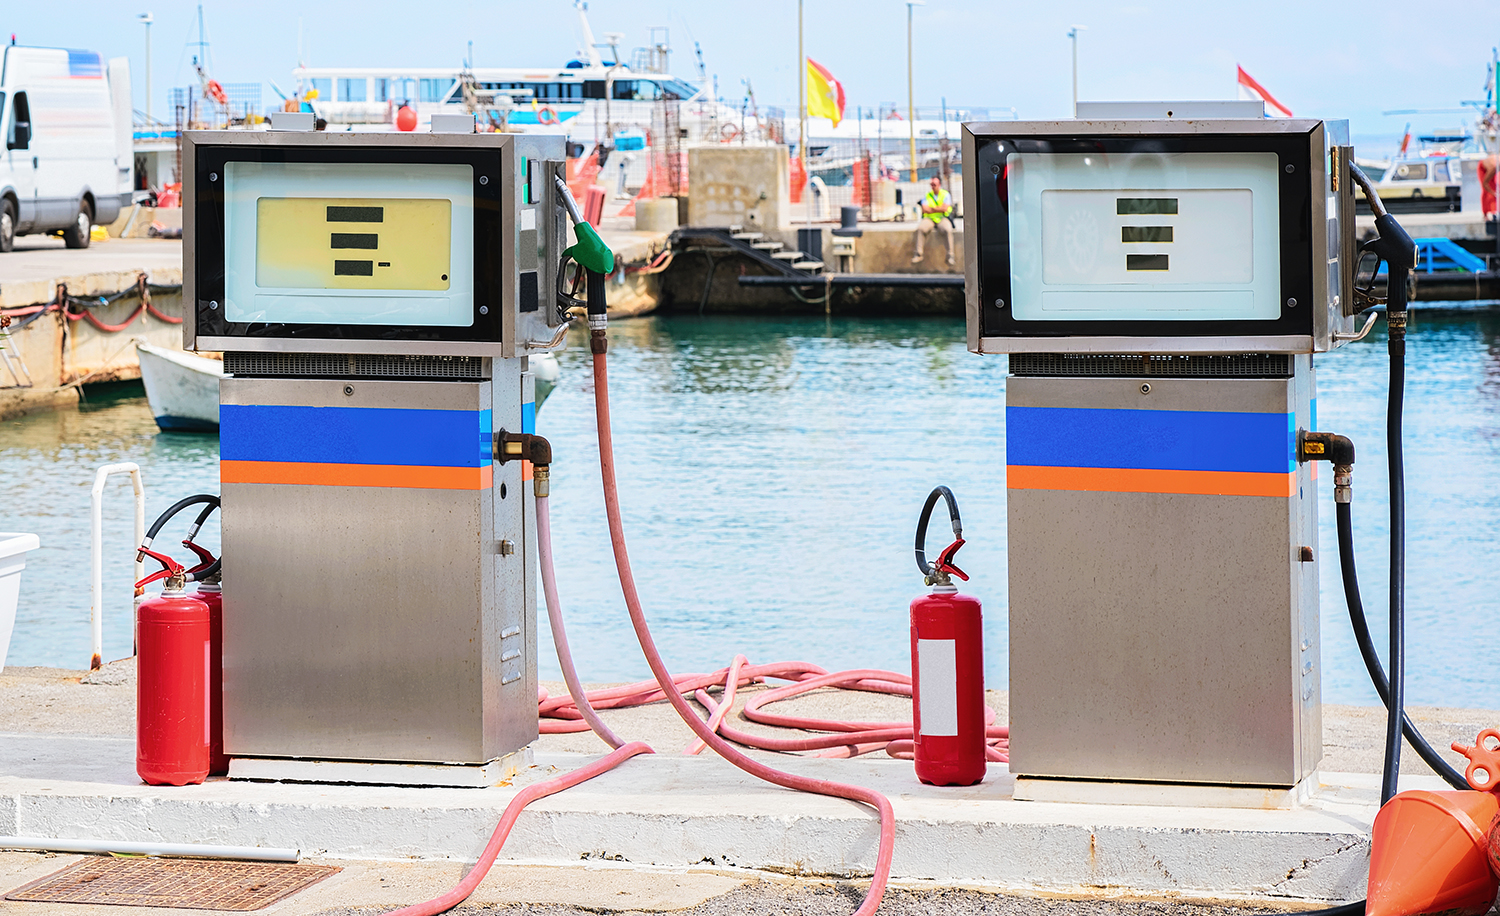 Diesel fuel prices set new record high | National Fisherman